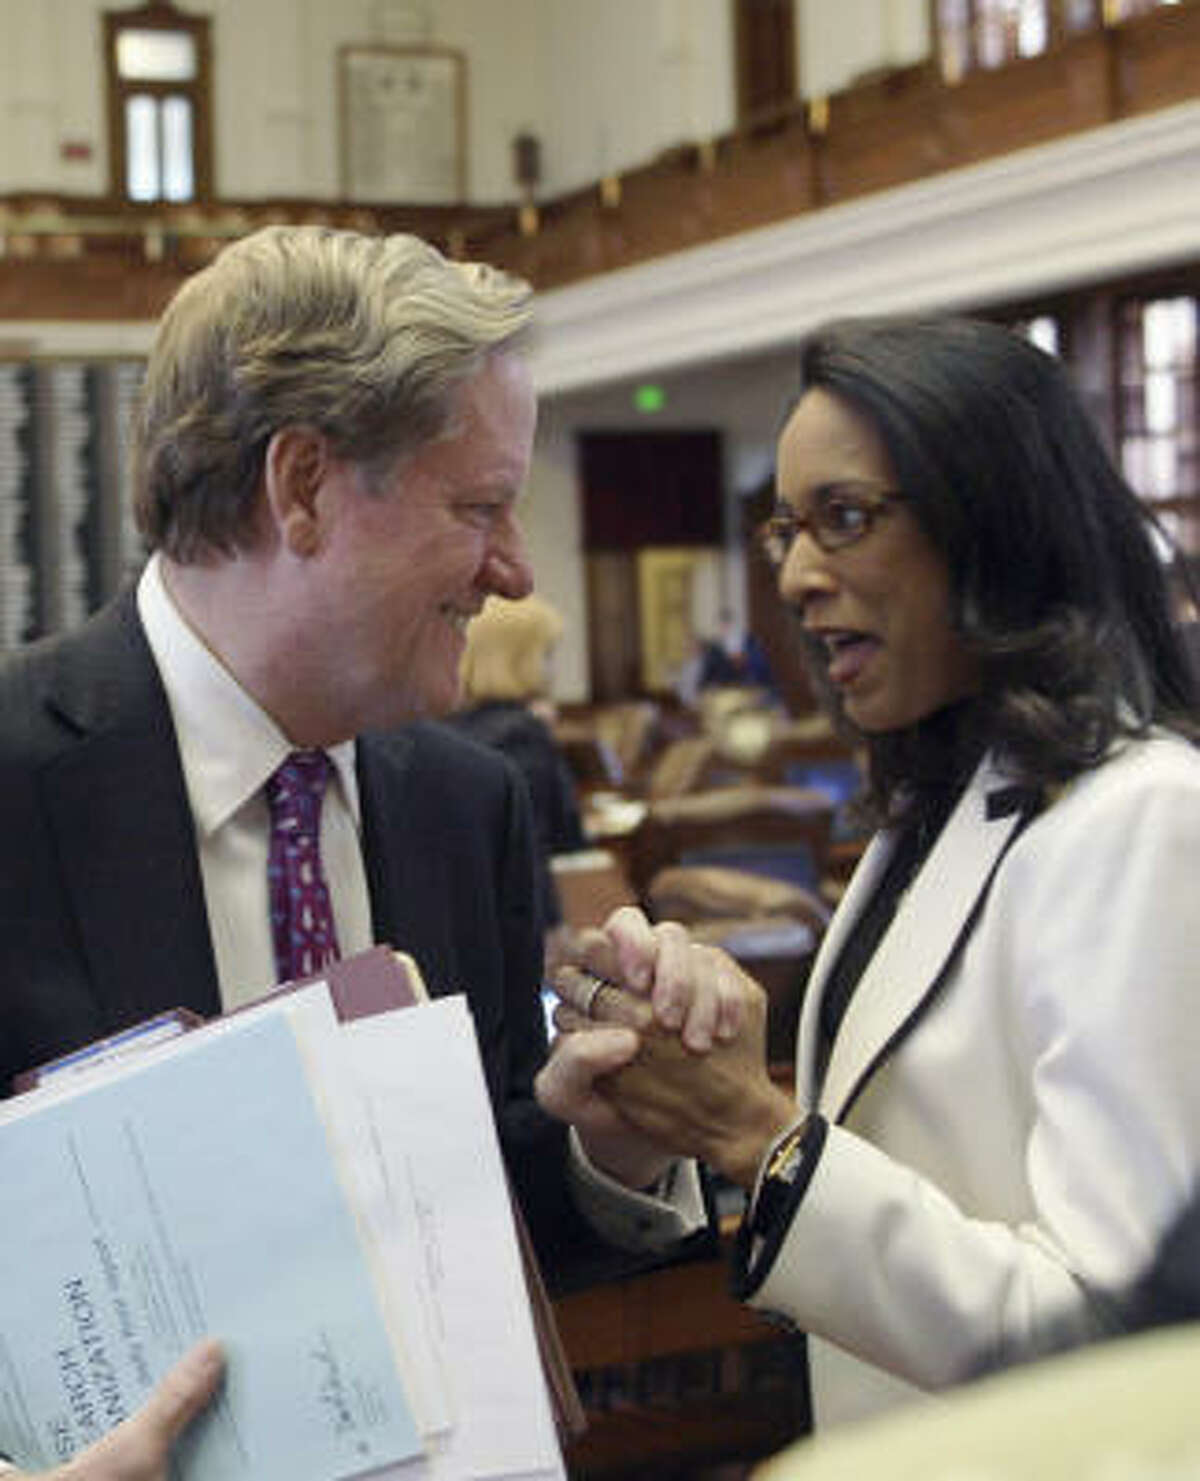 A Texas state representative has been indicted on multiple charges. A grand jury in Austin has indicted Rep. Dawnna Dukes (right) on multiple felony charges. Dukes denies the allegations. The charges come just a week after lawmakers reconvened at the state capitol. >>>Click through the gallery to see key lawmakers and issues to watch during the current legislative session.